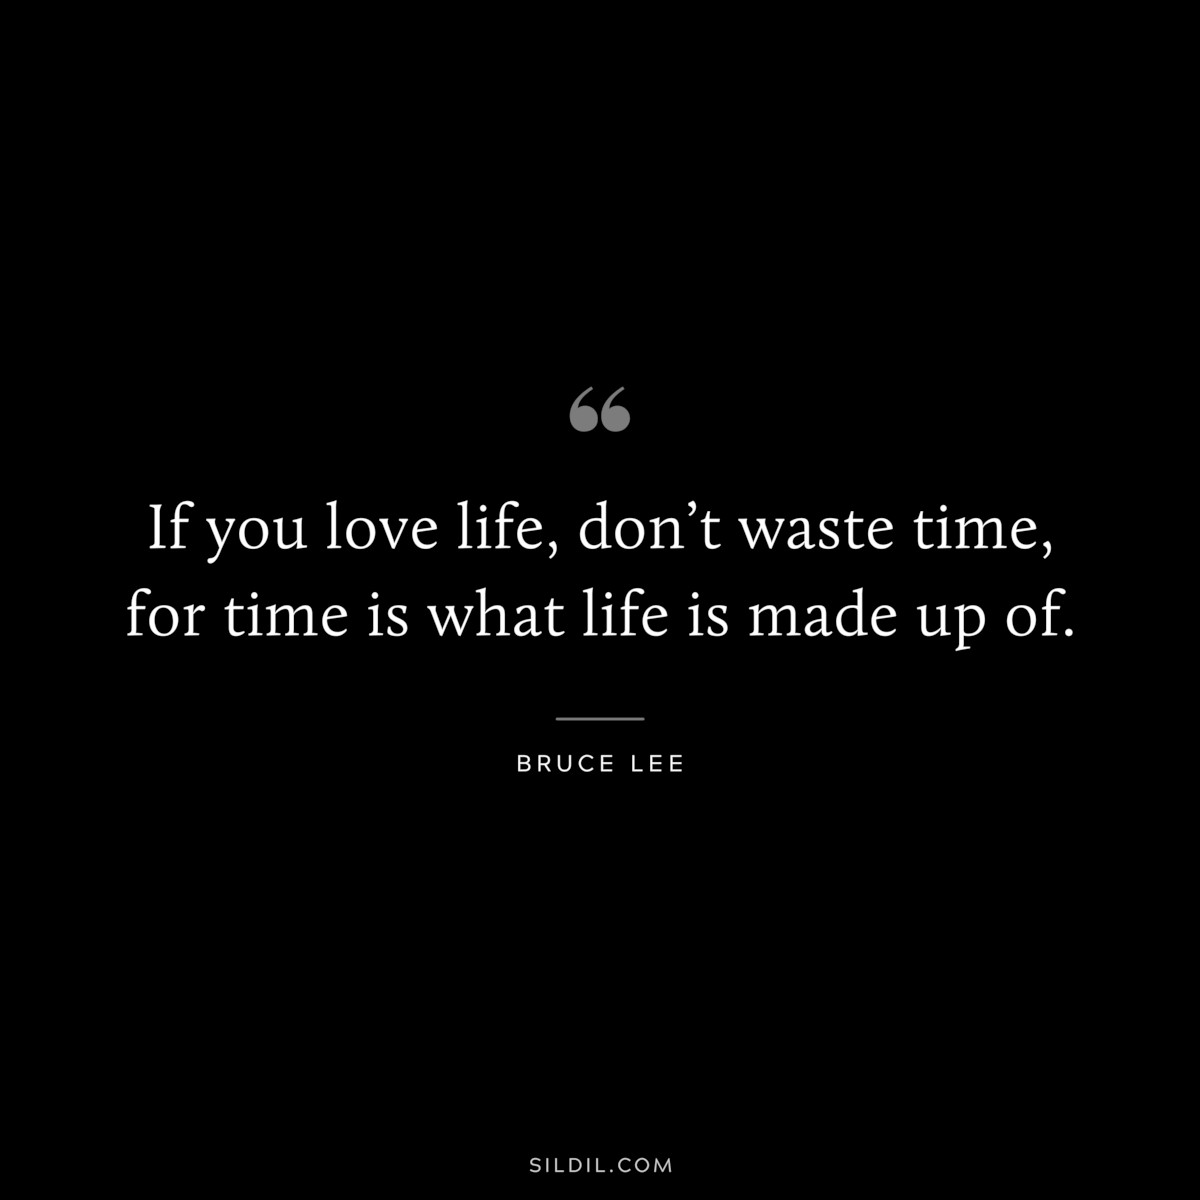 If you love life, don’t waste time, for time is what life is made up of. ― Bruce Lee